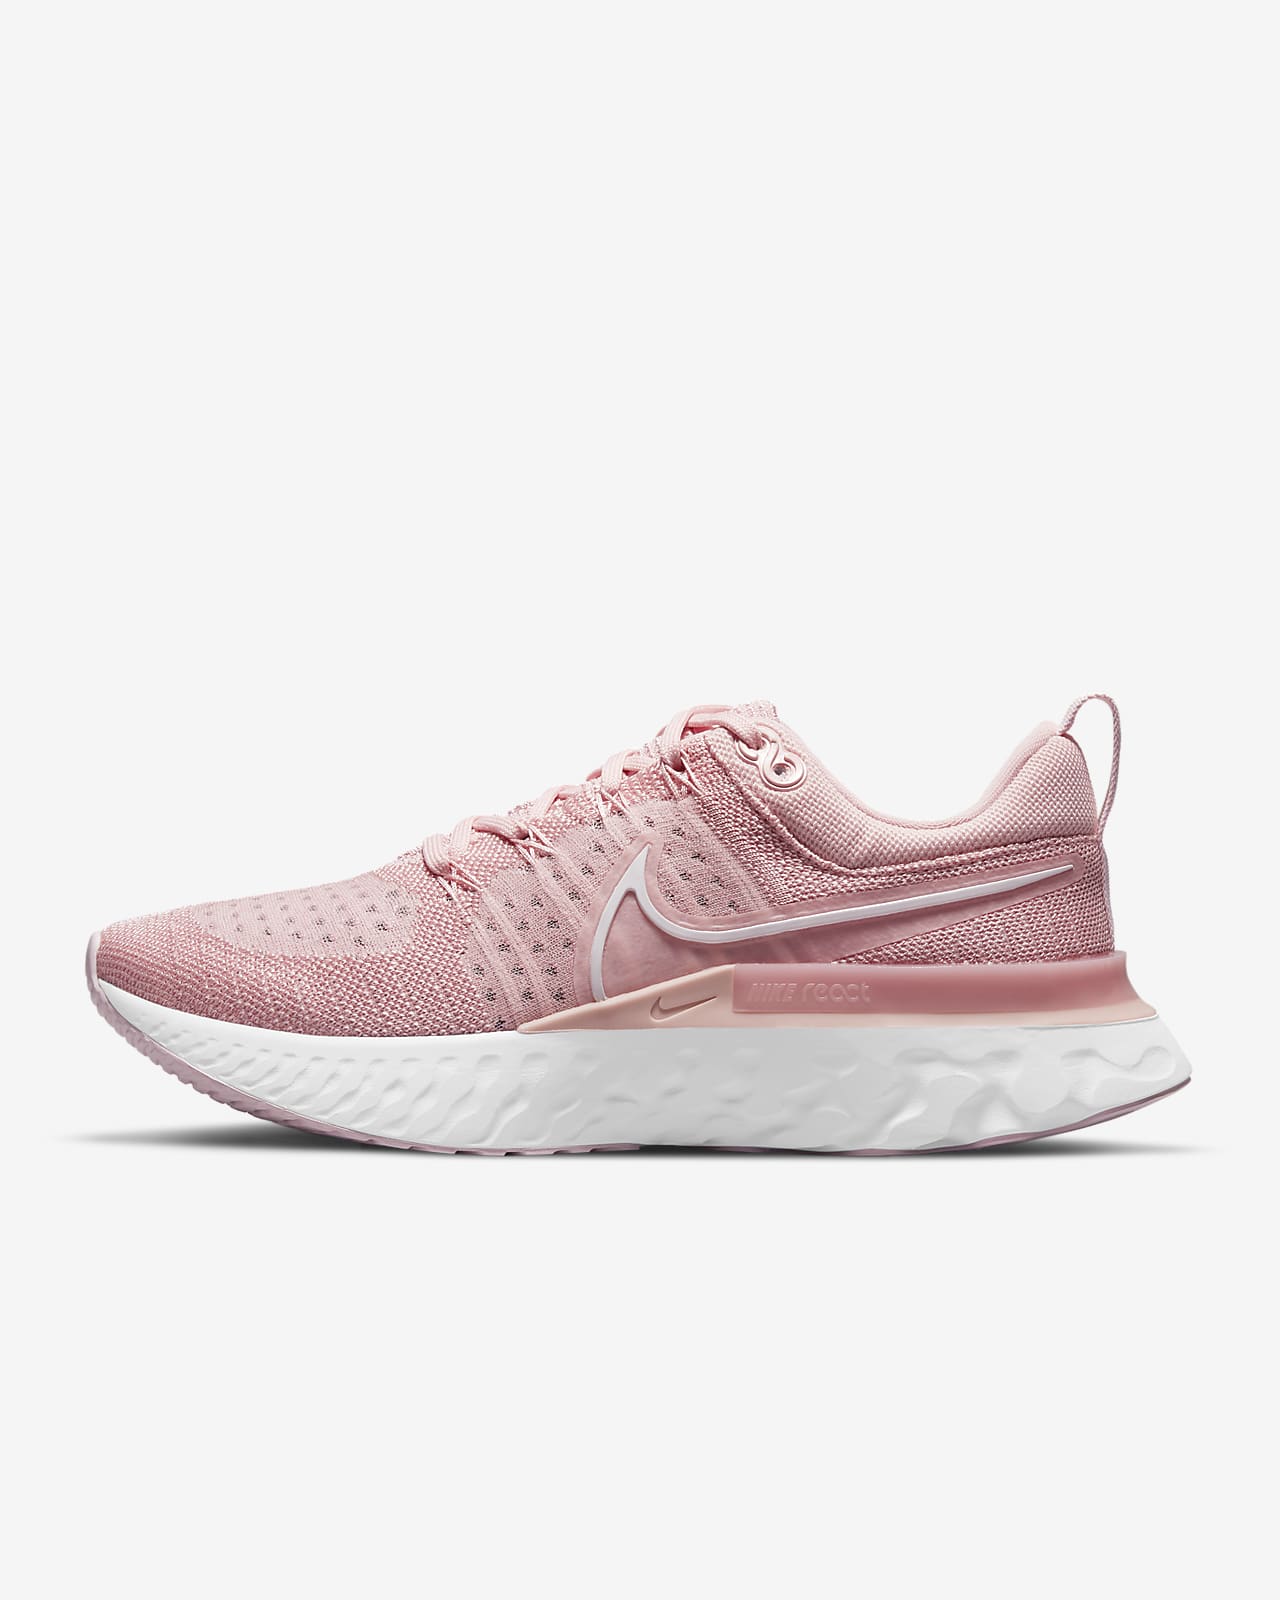 amanecer Absay Actual Nike React Infinity 2 Women's Road Running Shoes. Nike.com